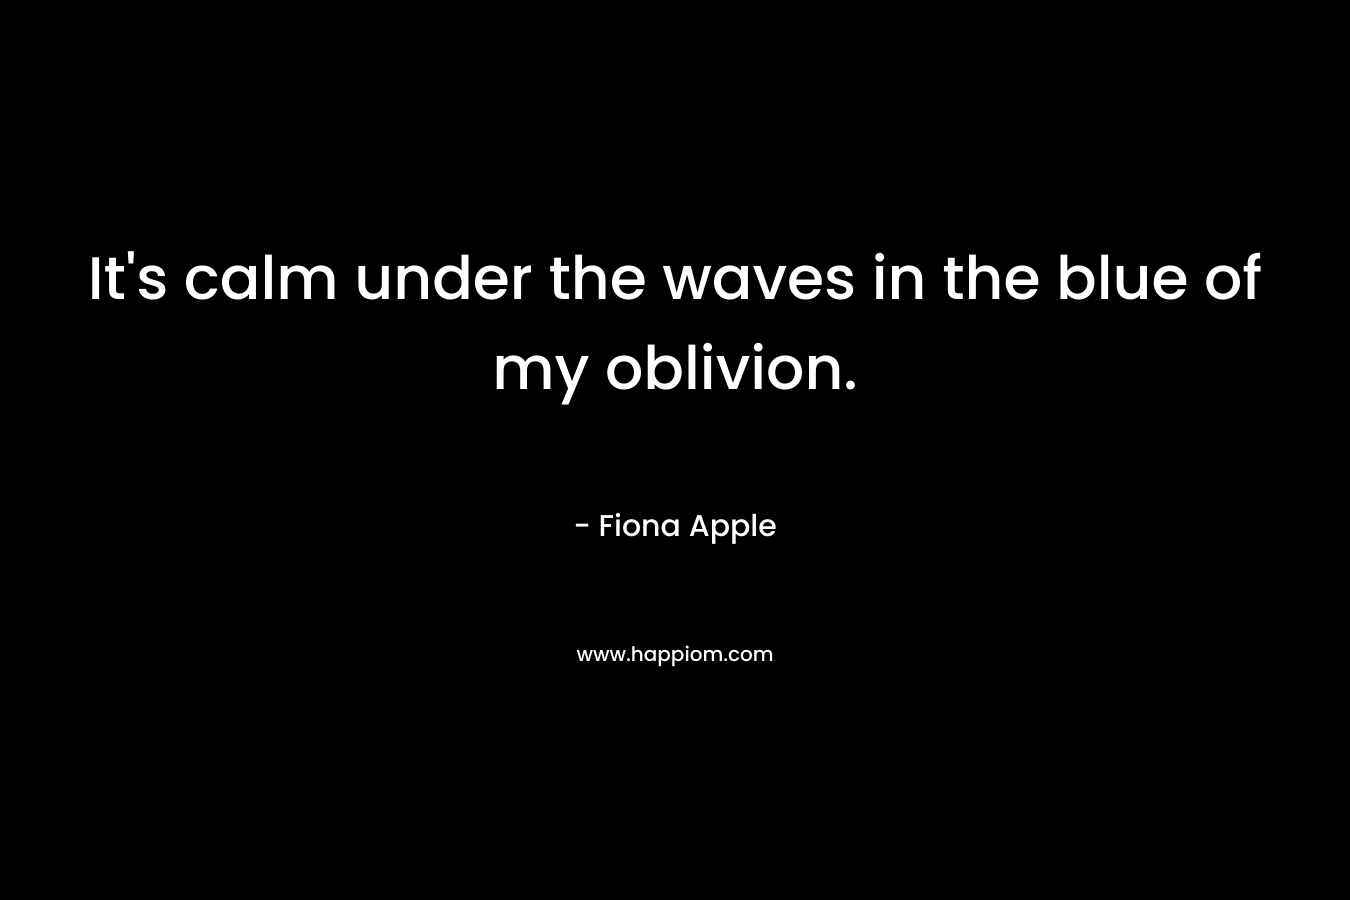 It’s calm under the waves in the blue of my oblivion. – Fiona Apple